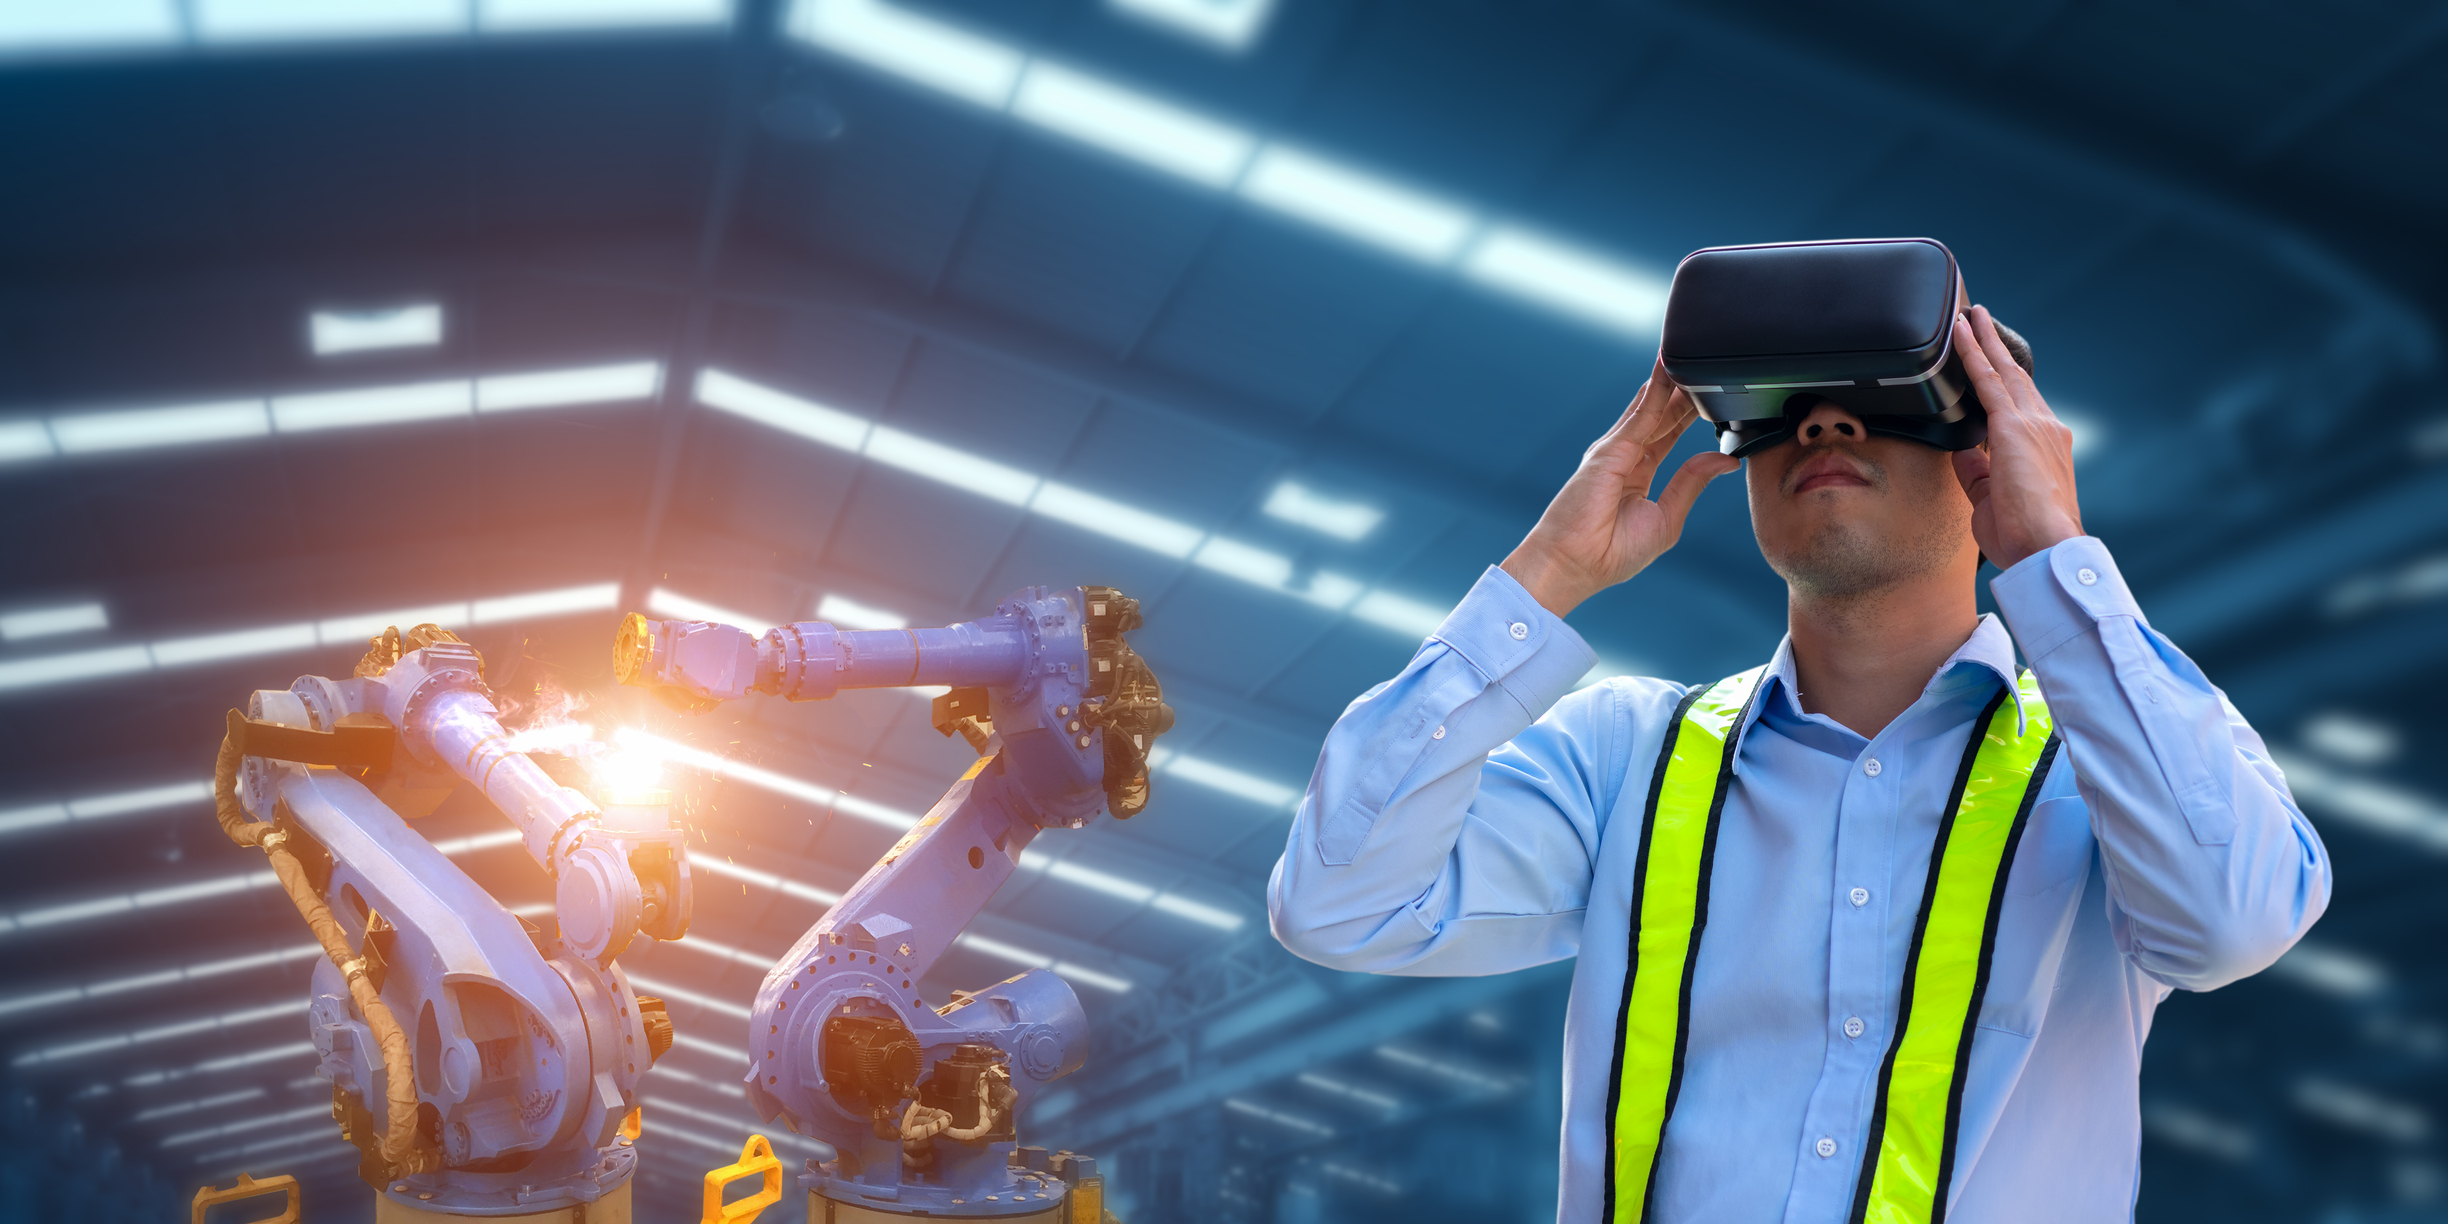 How VR Technology Can Improve Manufacturing Performance